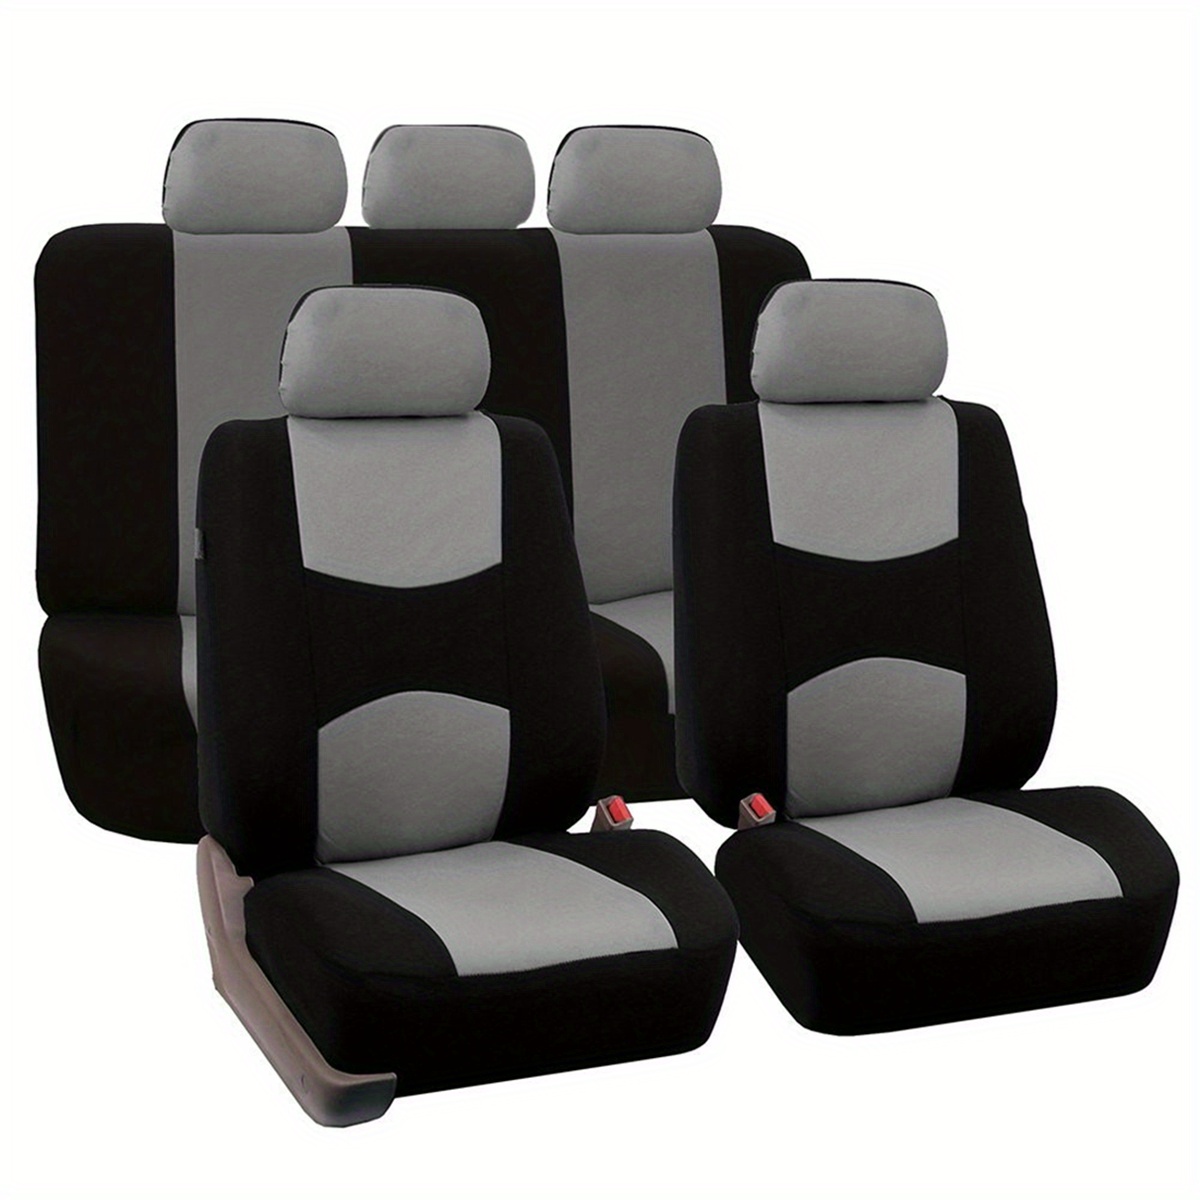 Car Front Seat Cover Polyester Fabric Universal Car Styling Seat